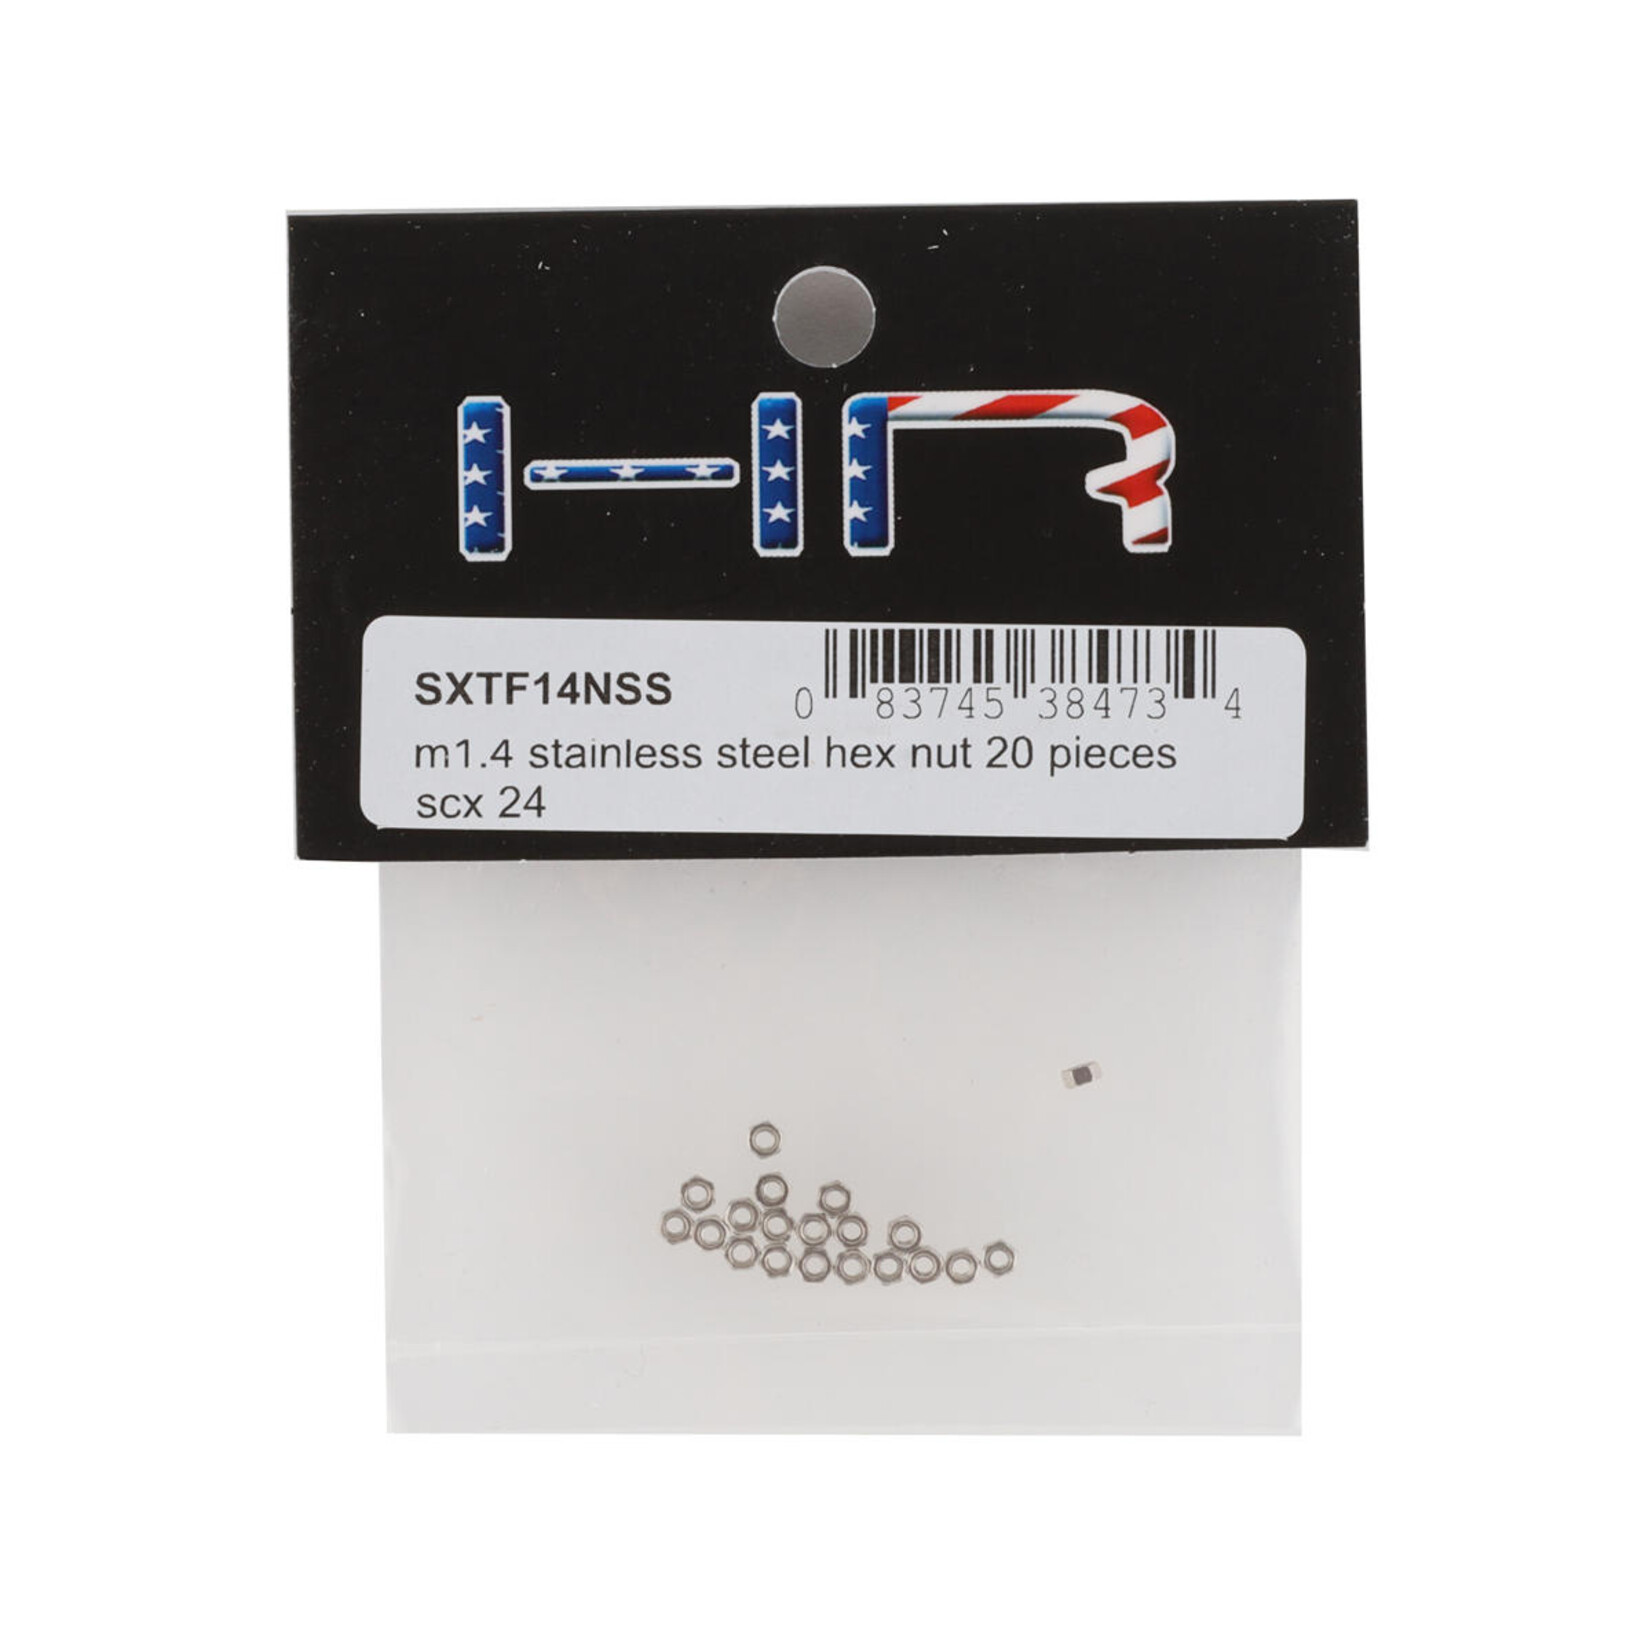 Hot Racing Hot Racing 1.4mm Stainless Steel Hex Nut (20) (SCX24/AX24)  #HRASXTF14NSS